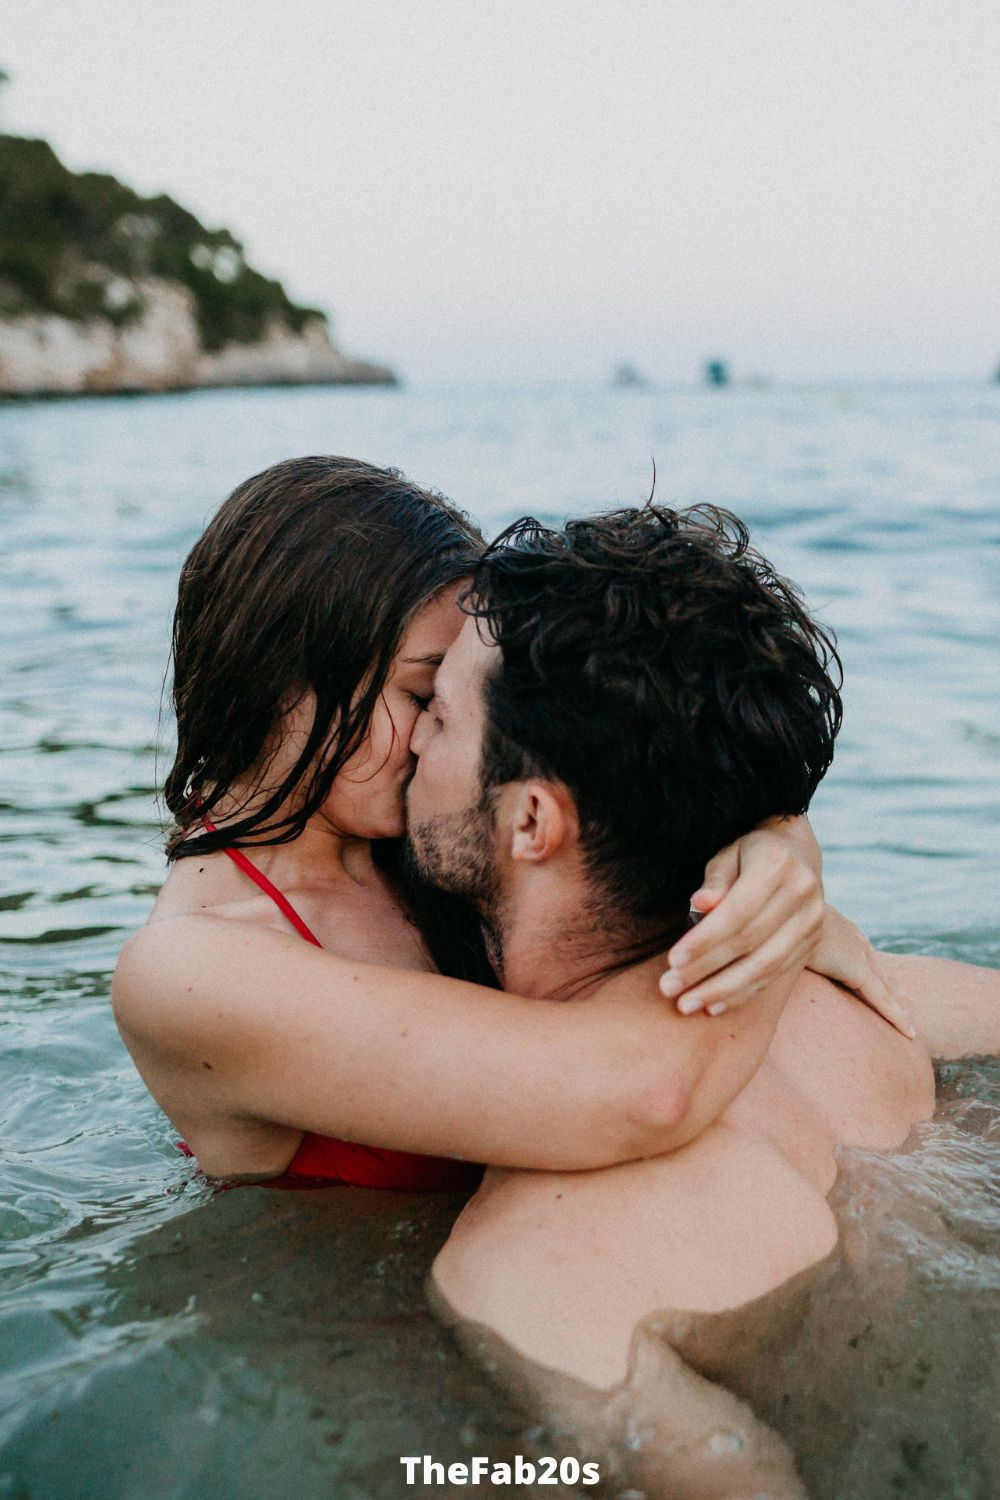 Couple kissing romantically in the ocean - Featured in: How to stop overthinking in a relationship